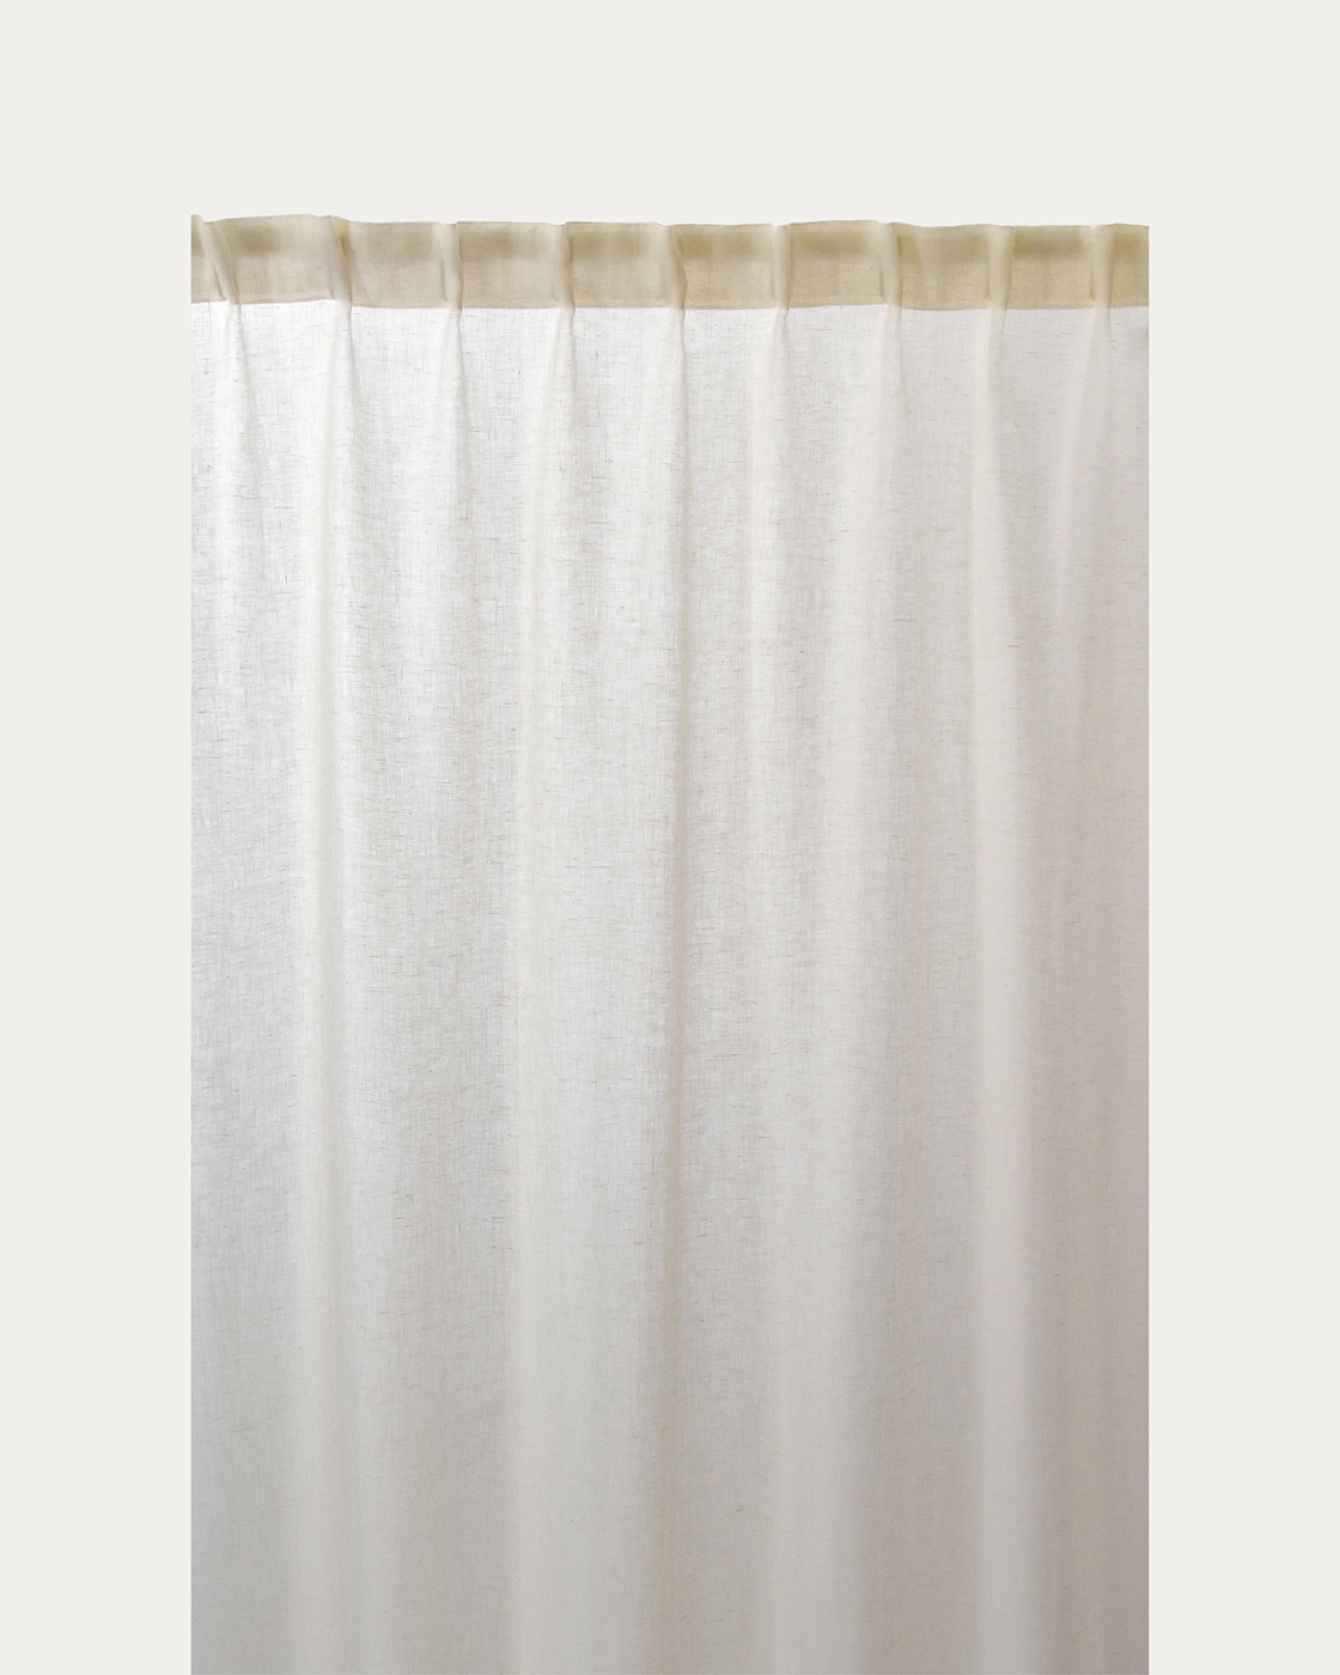 Product image creamy beige INTERMEZZO curtain of sheer linen with finished pleat tape from LINUM DESIGN. Size 140x290 cm and sold in 2-pack.